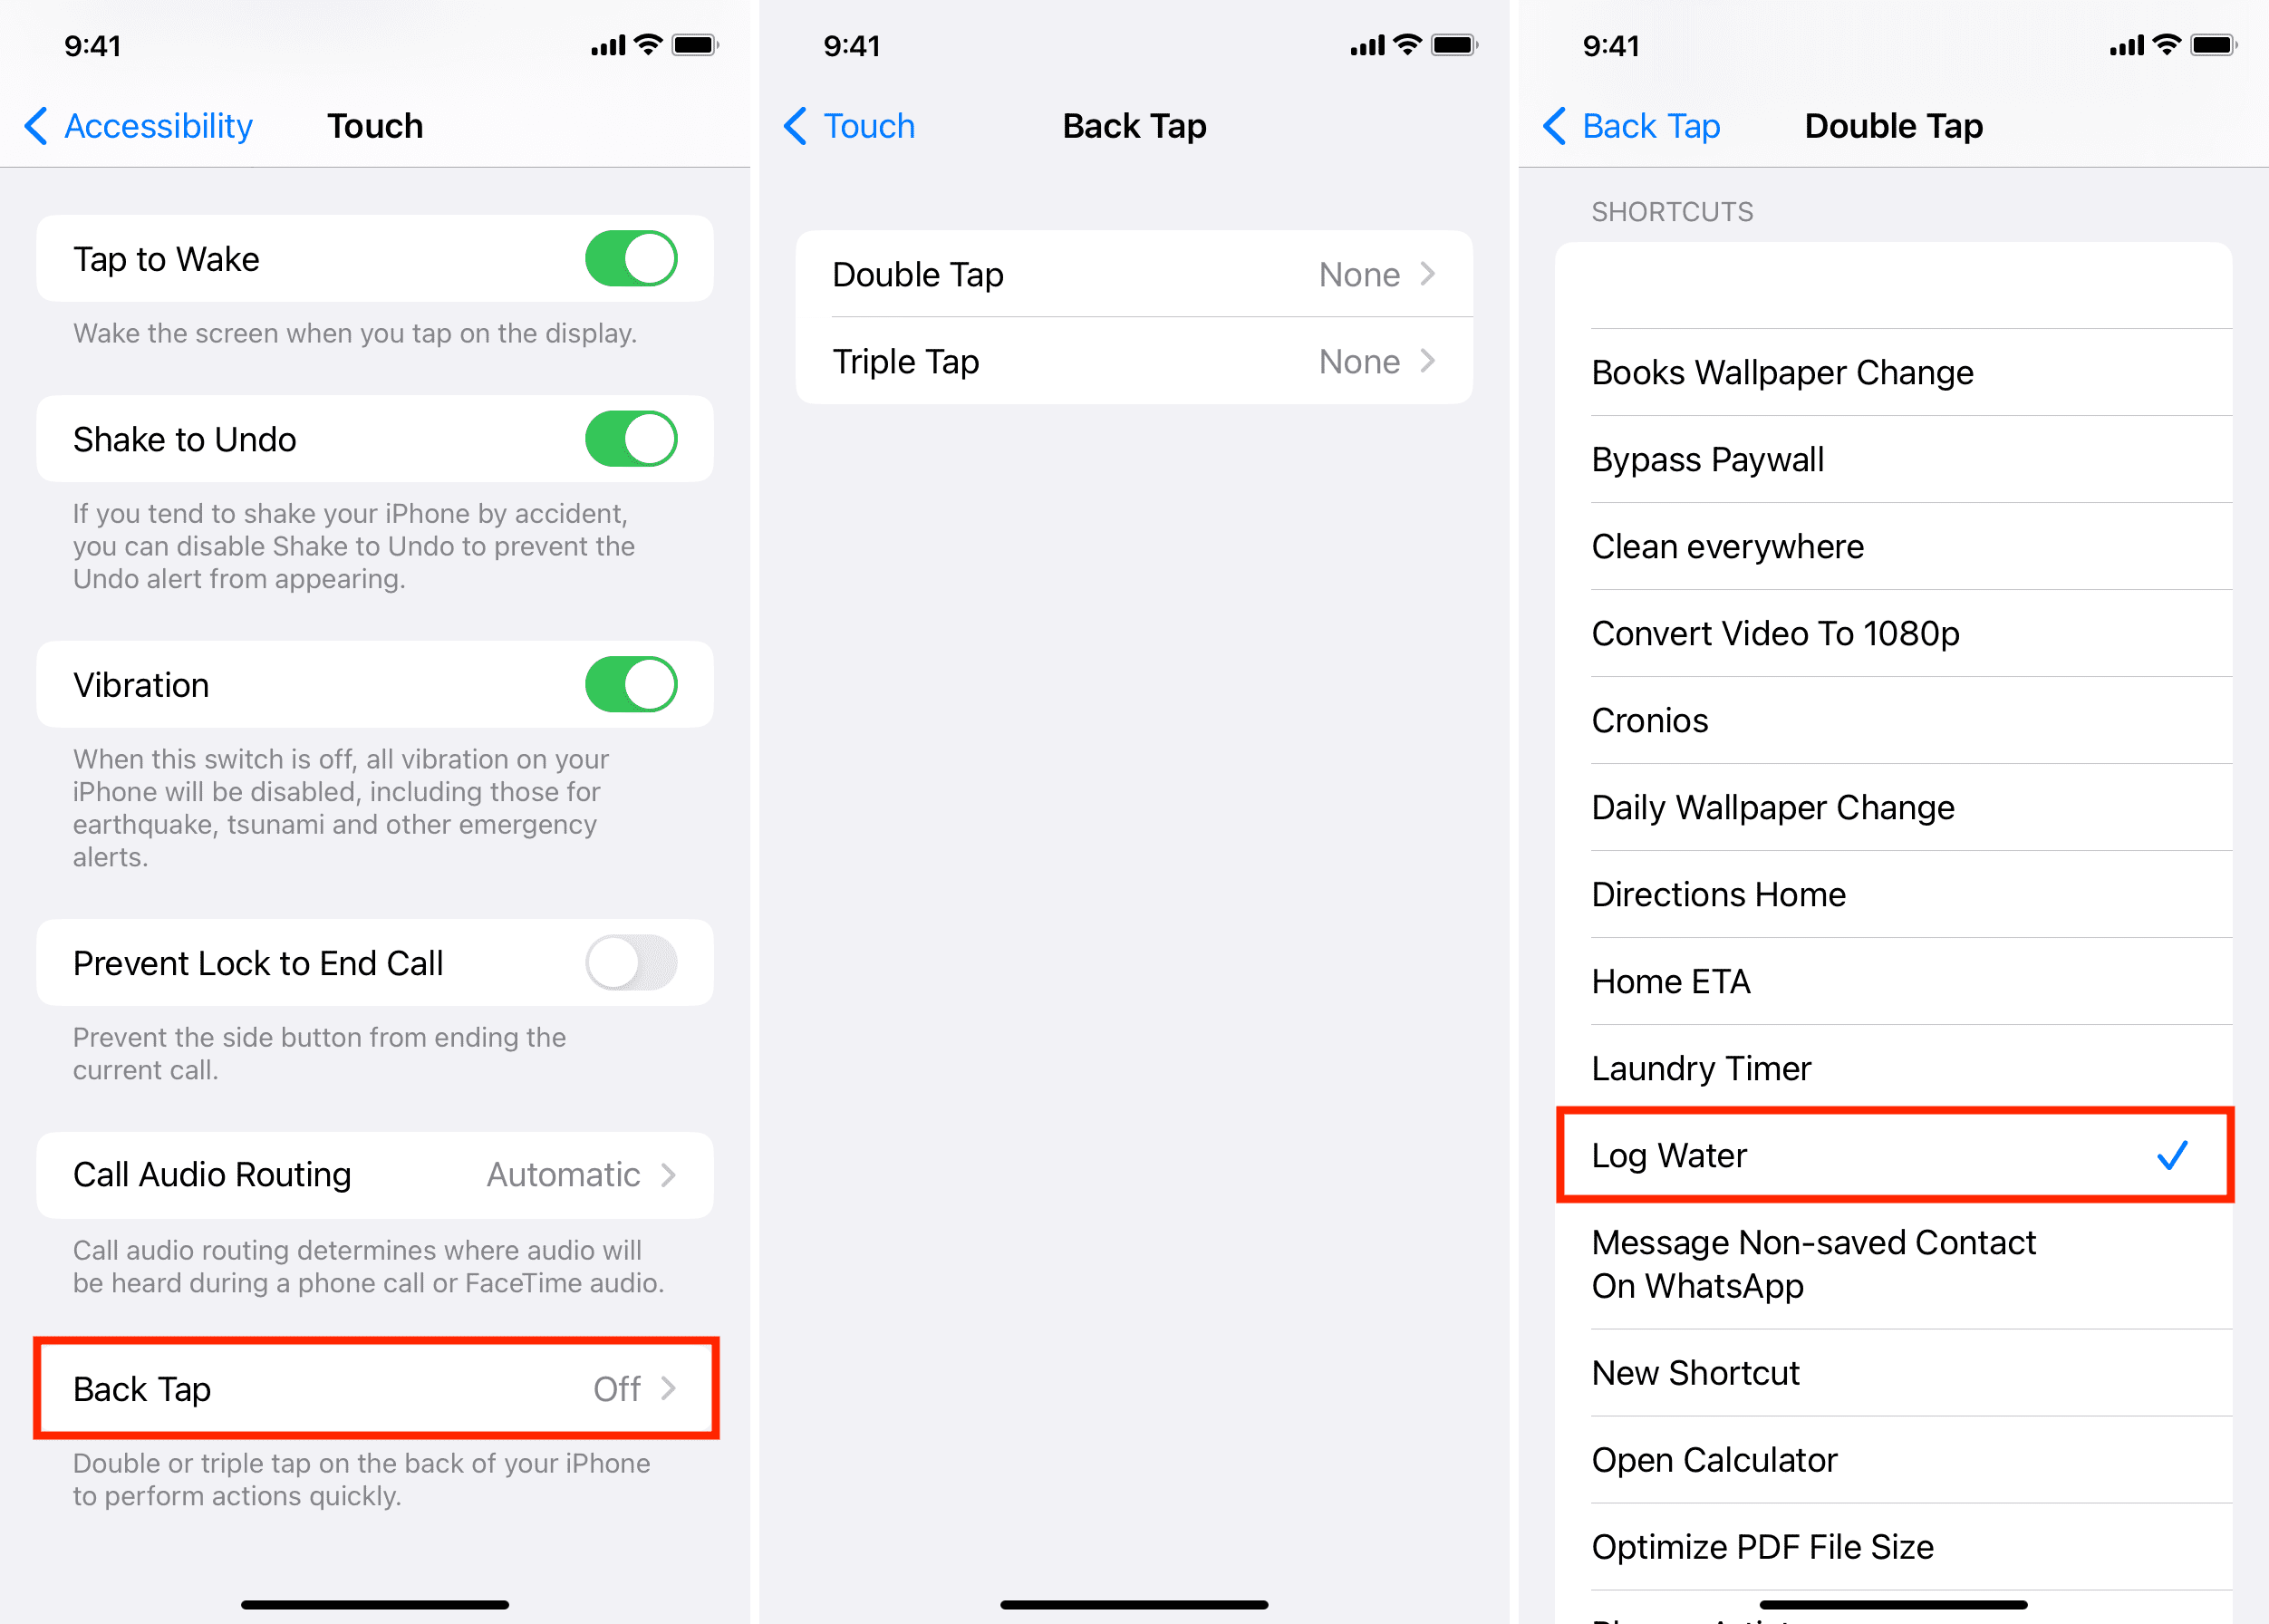 Quickly run iOS shortcut using Back Tap on iPhone